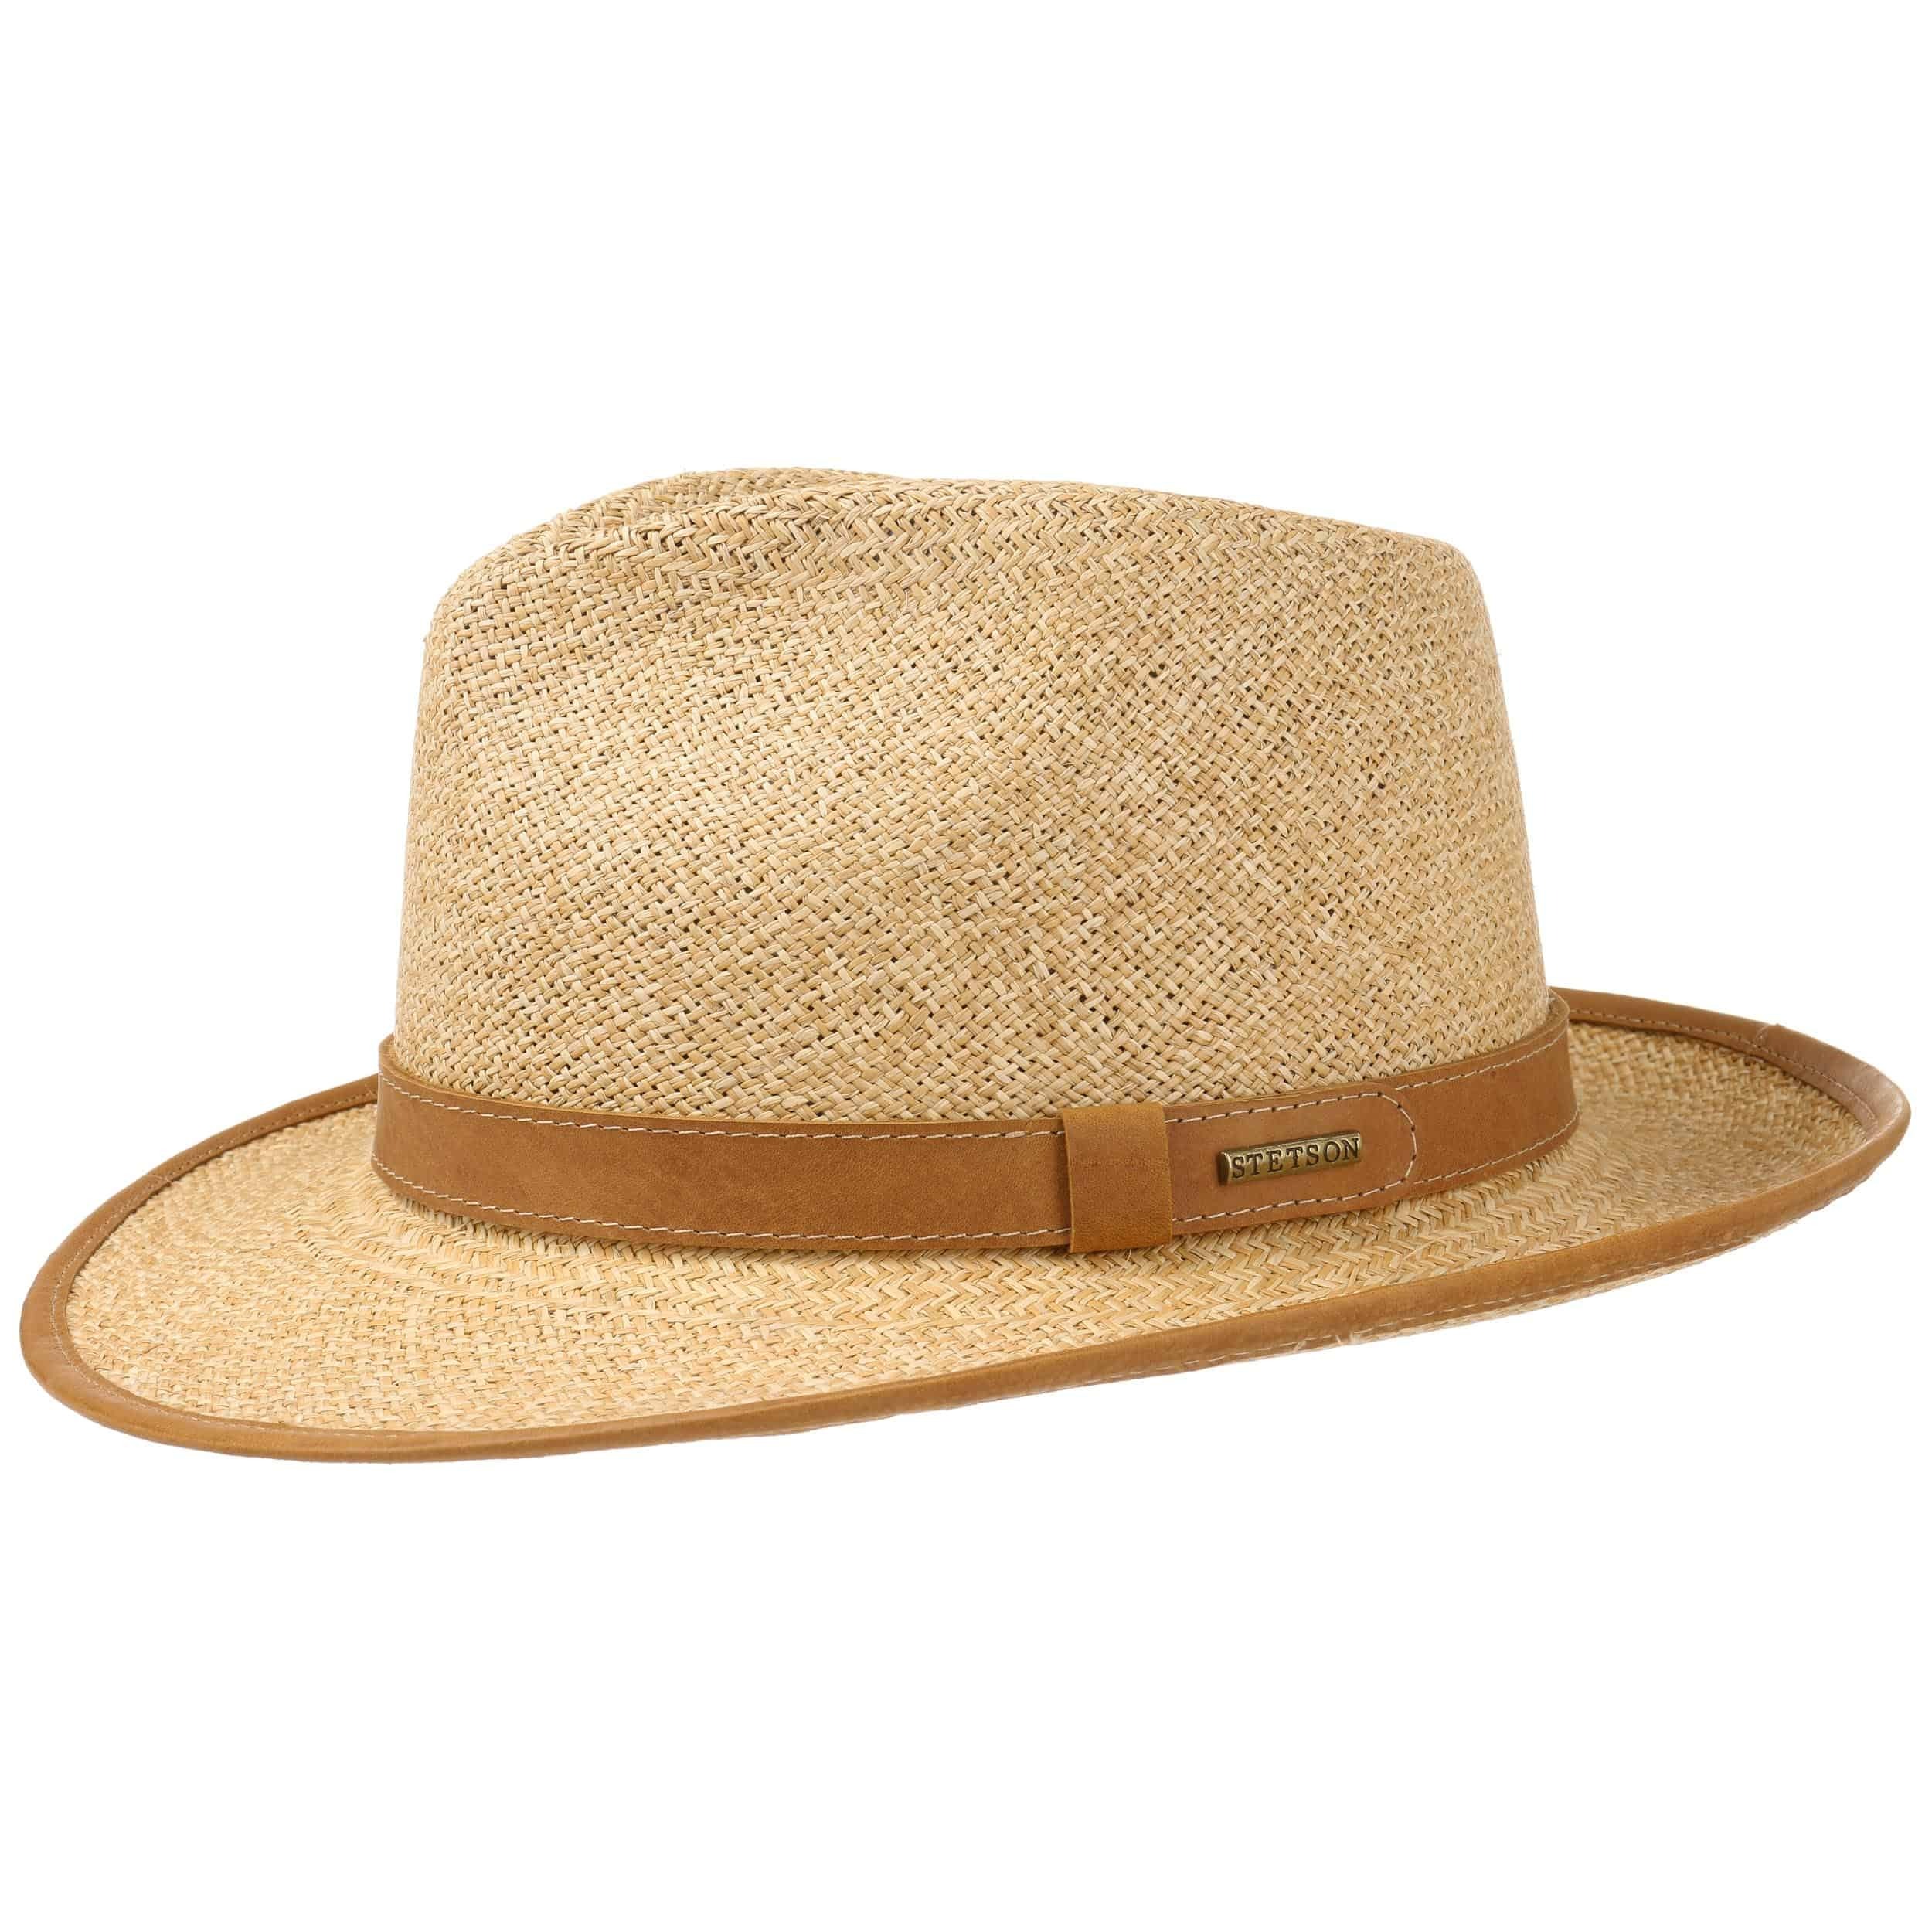 Greatwood Traveller Panama Hat by Stetson 169 00